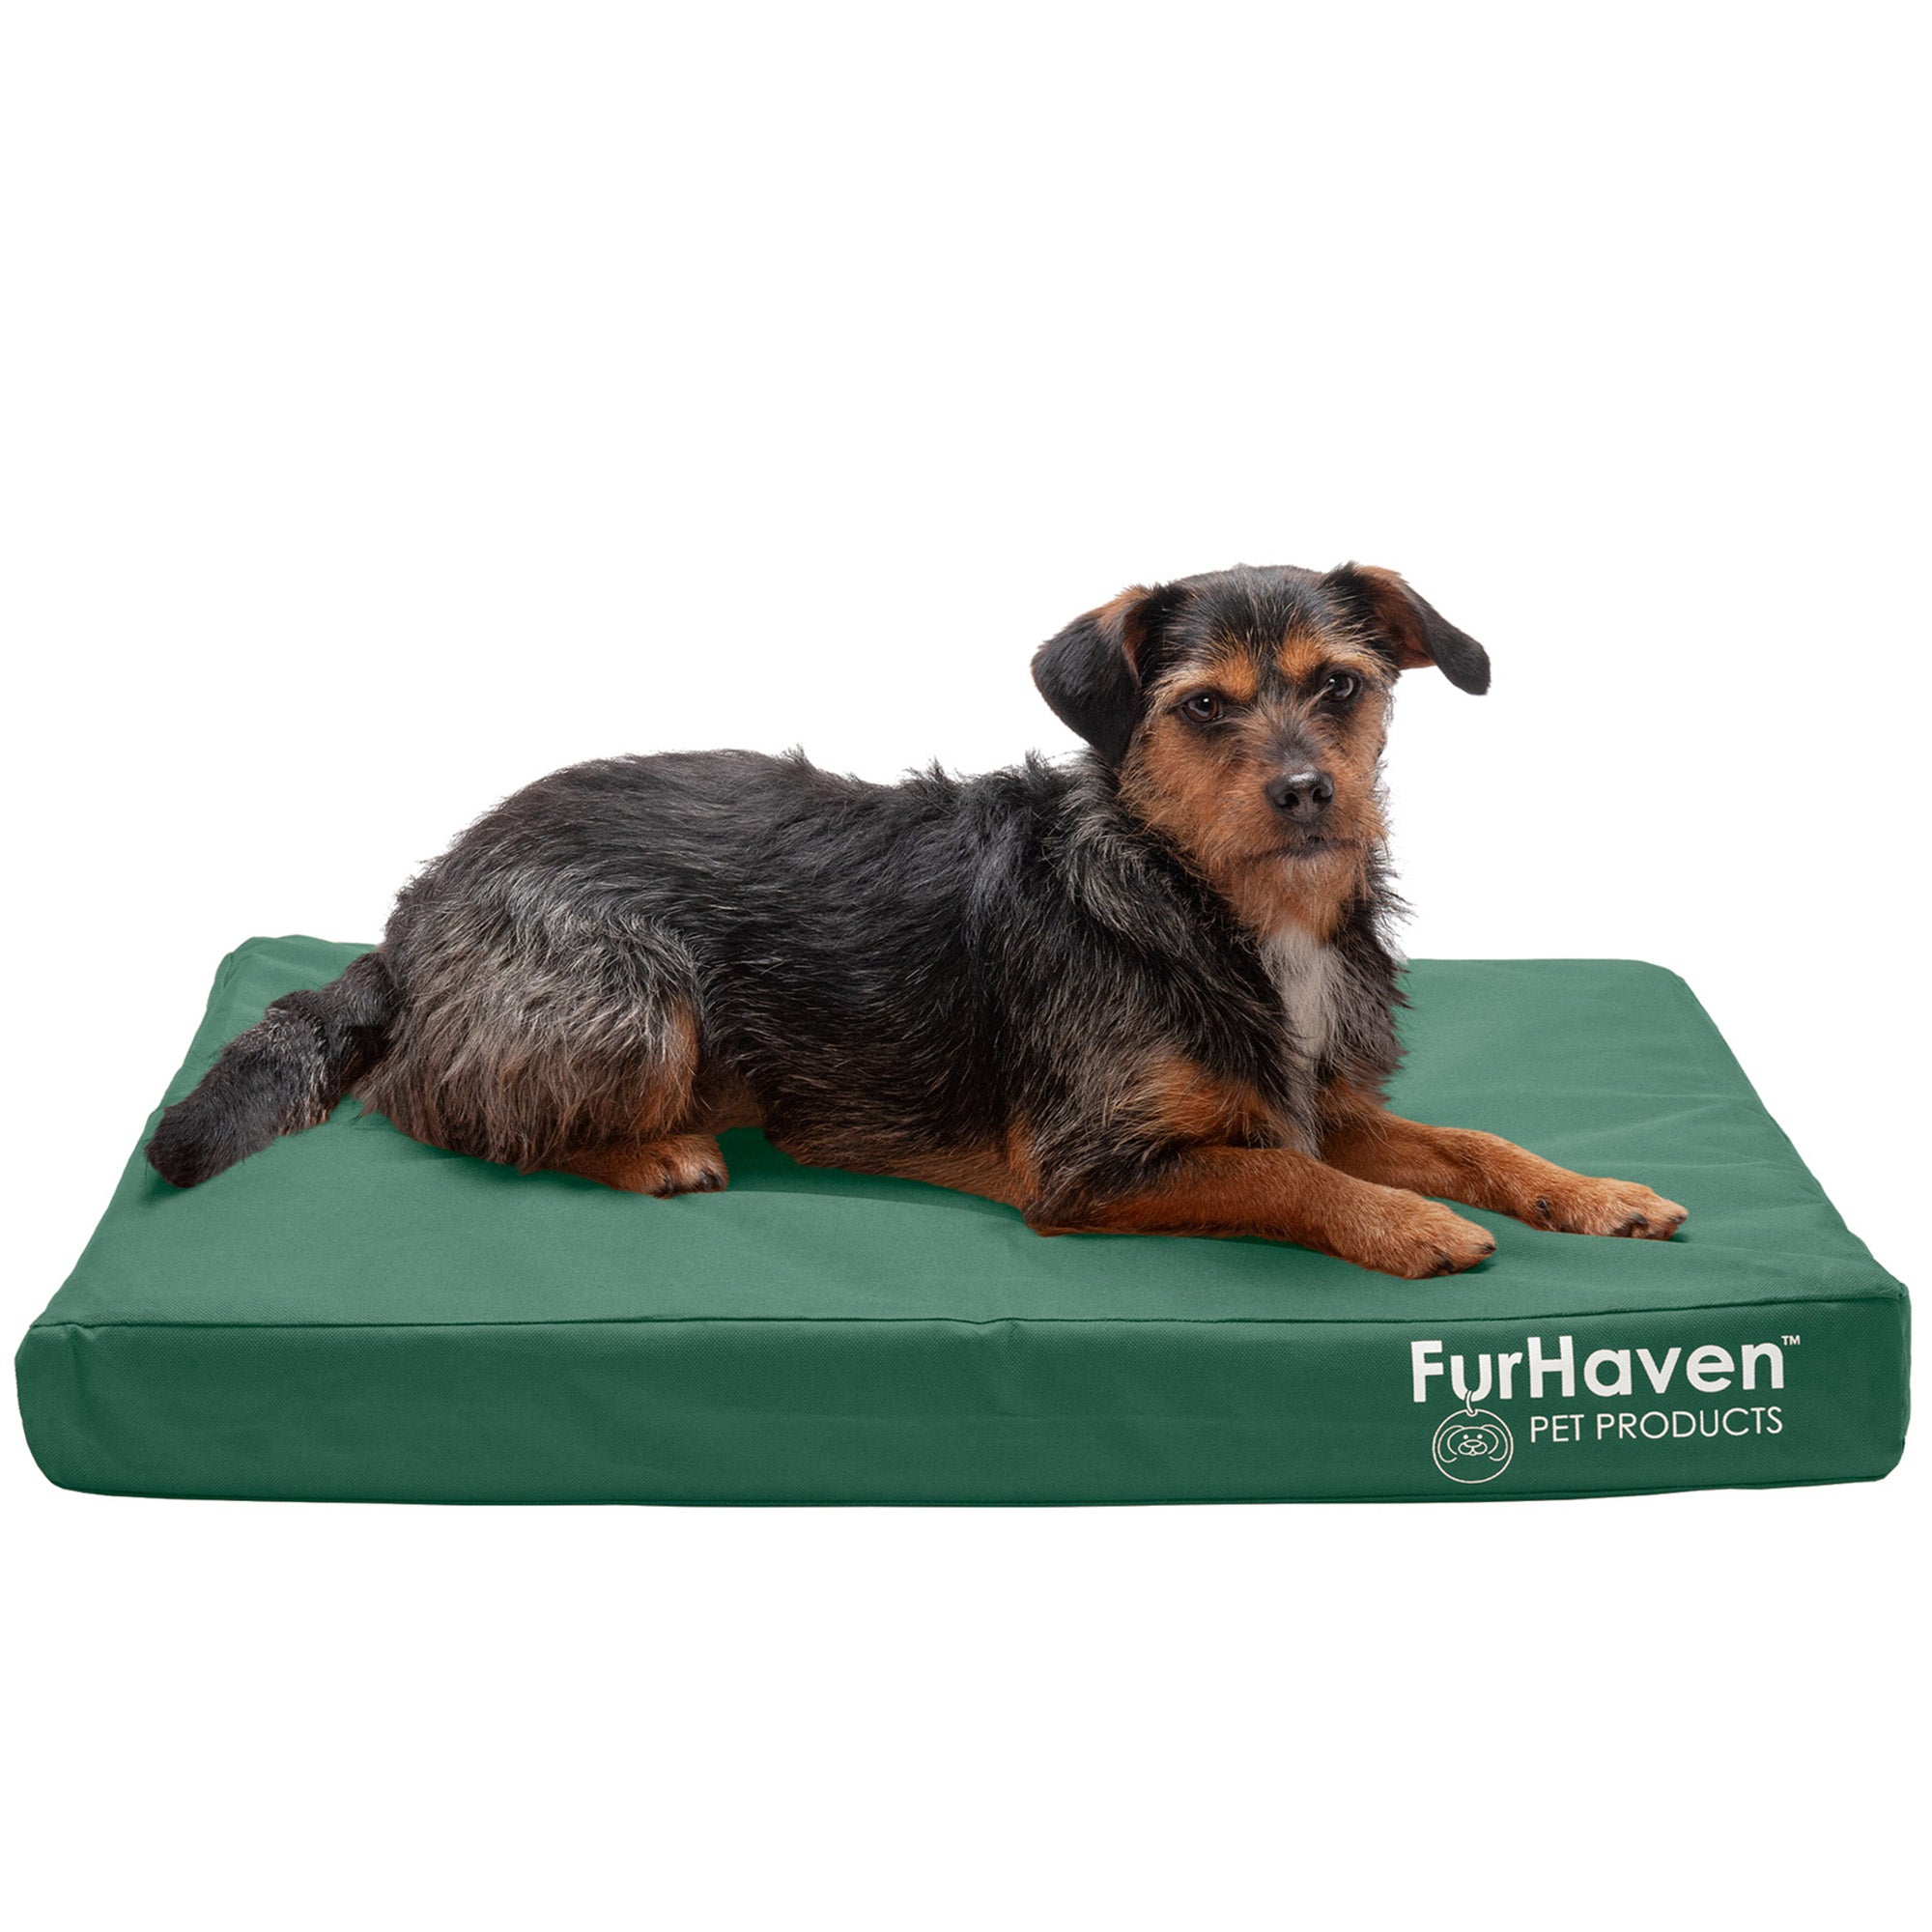 FurHaven Pet Products | Deluxe Cooling Gel Memory Foam Orthopedic Oxford Indoor/Outdoor Water-Resistant Pet Bed for Dogs and Cats， Forest， Medium